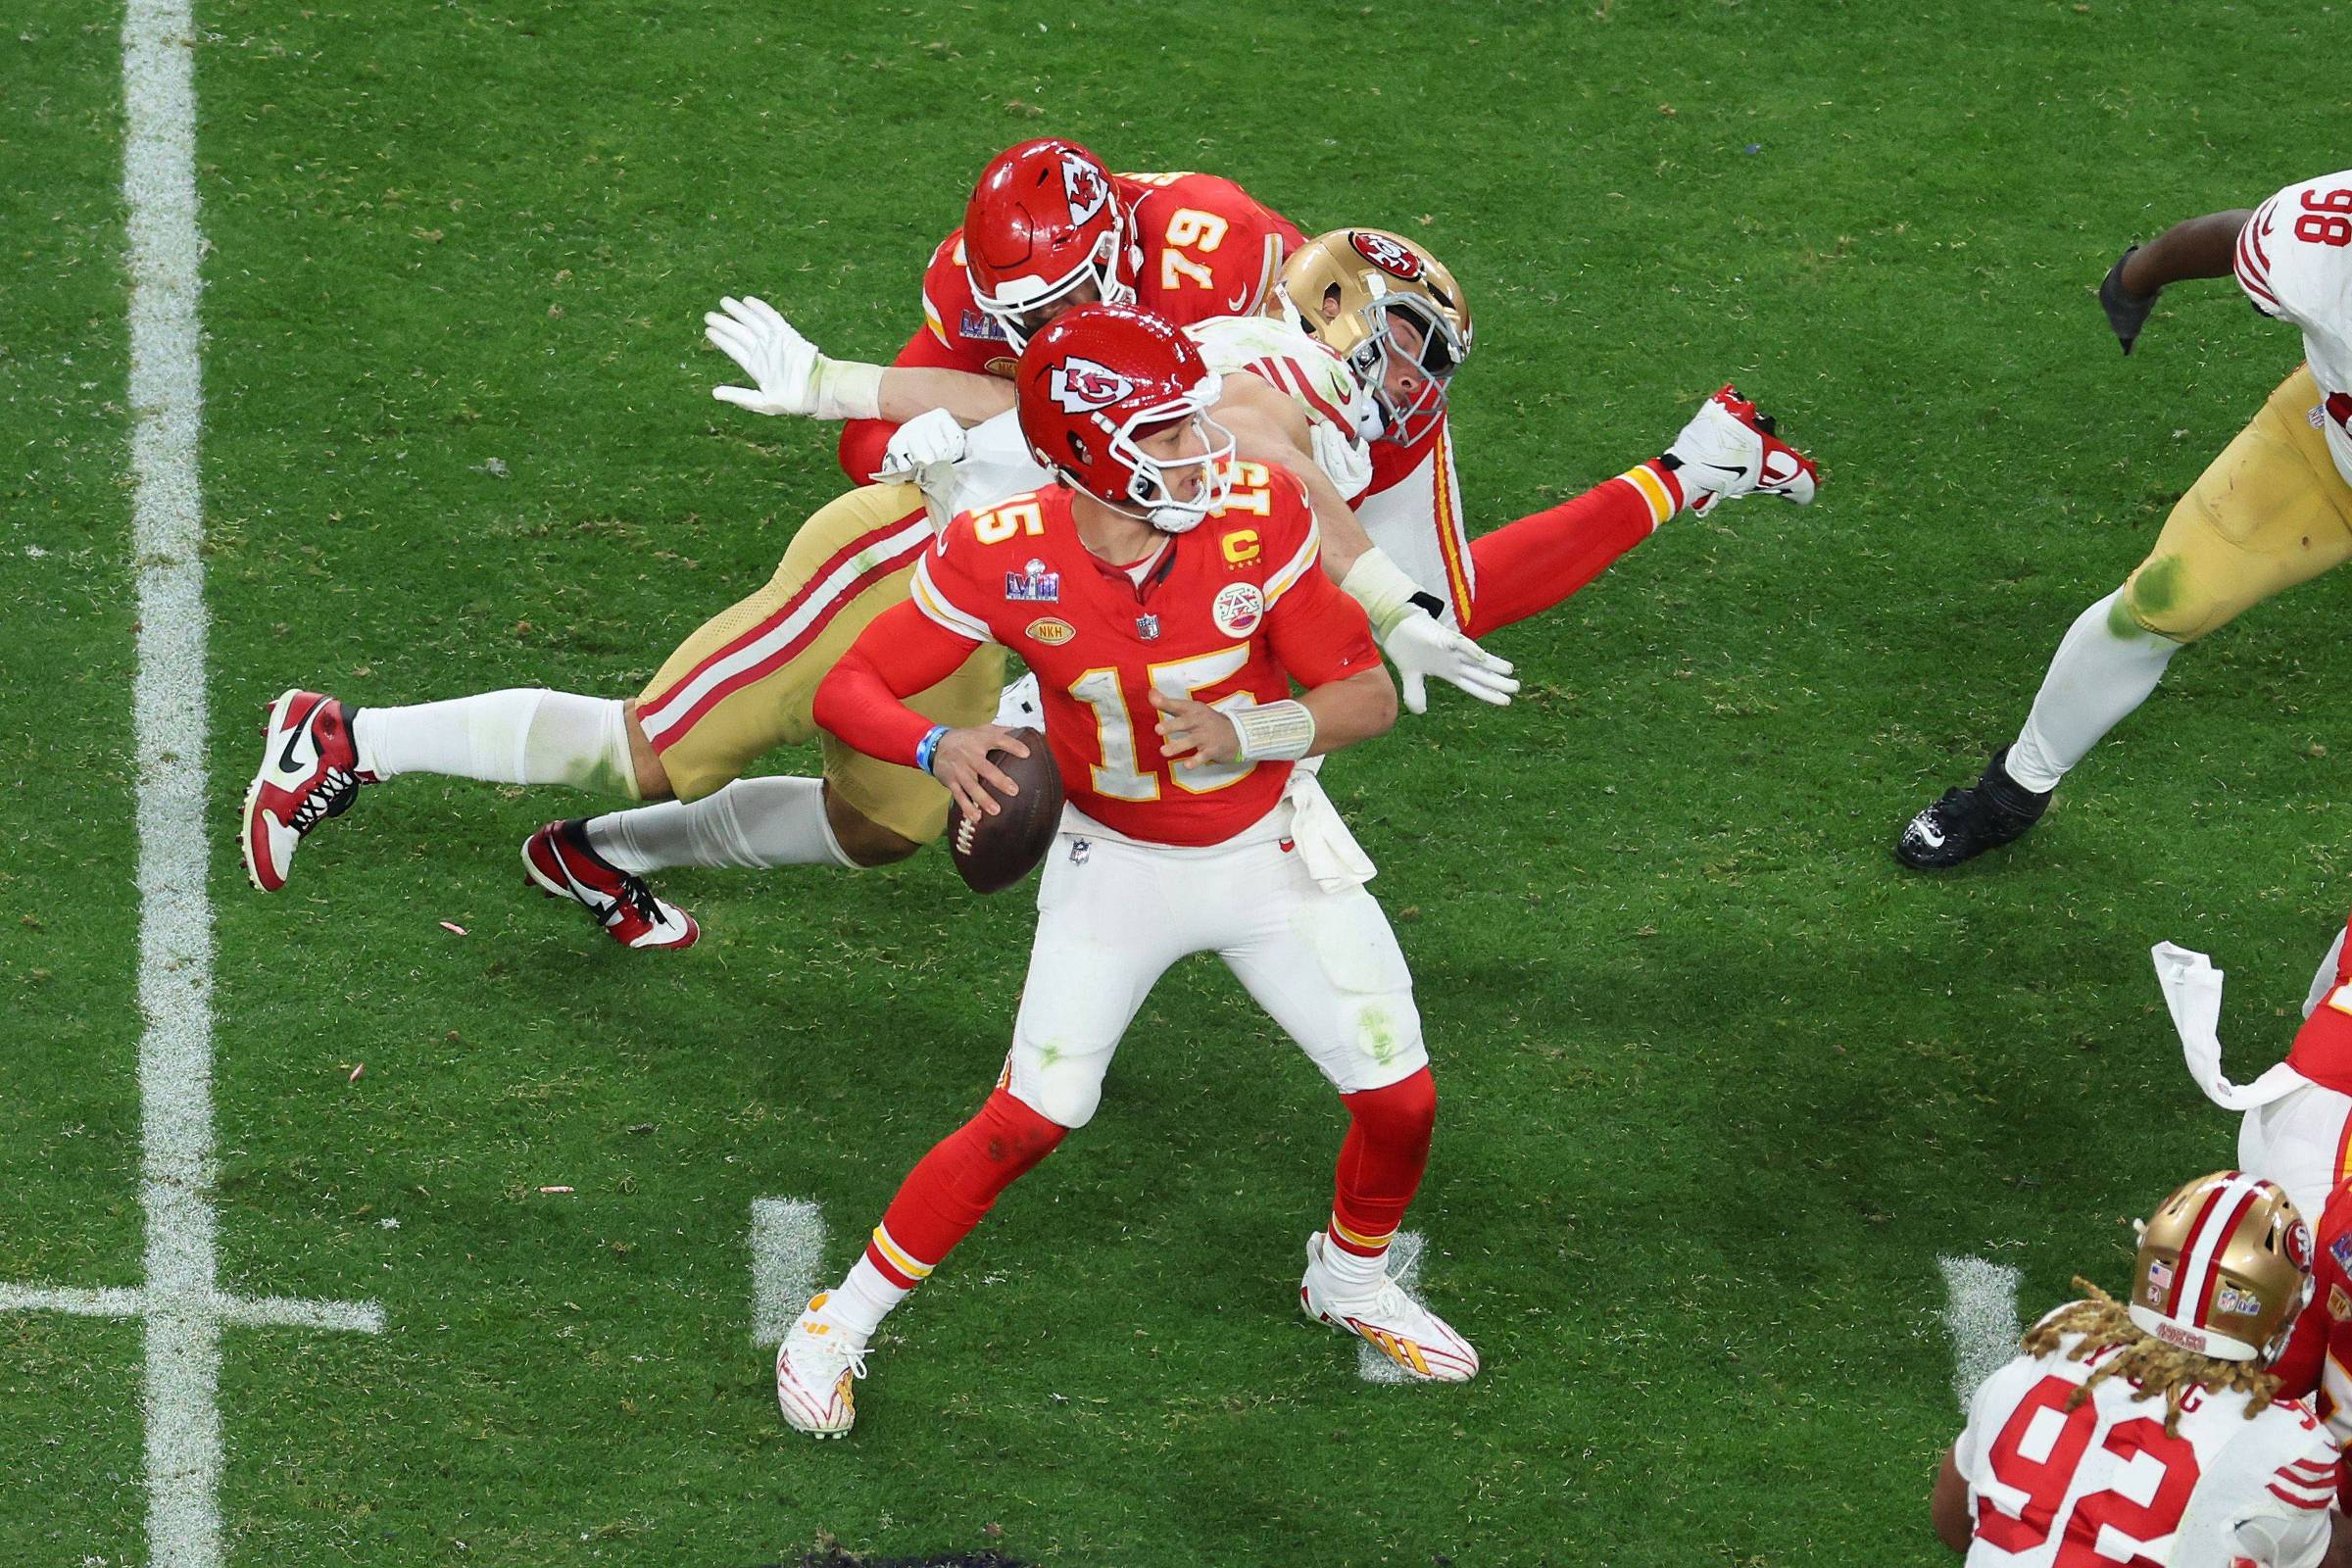 In the last seconds, Kansas City Chiefs win Super Bowl 58 in the second overtime in history